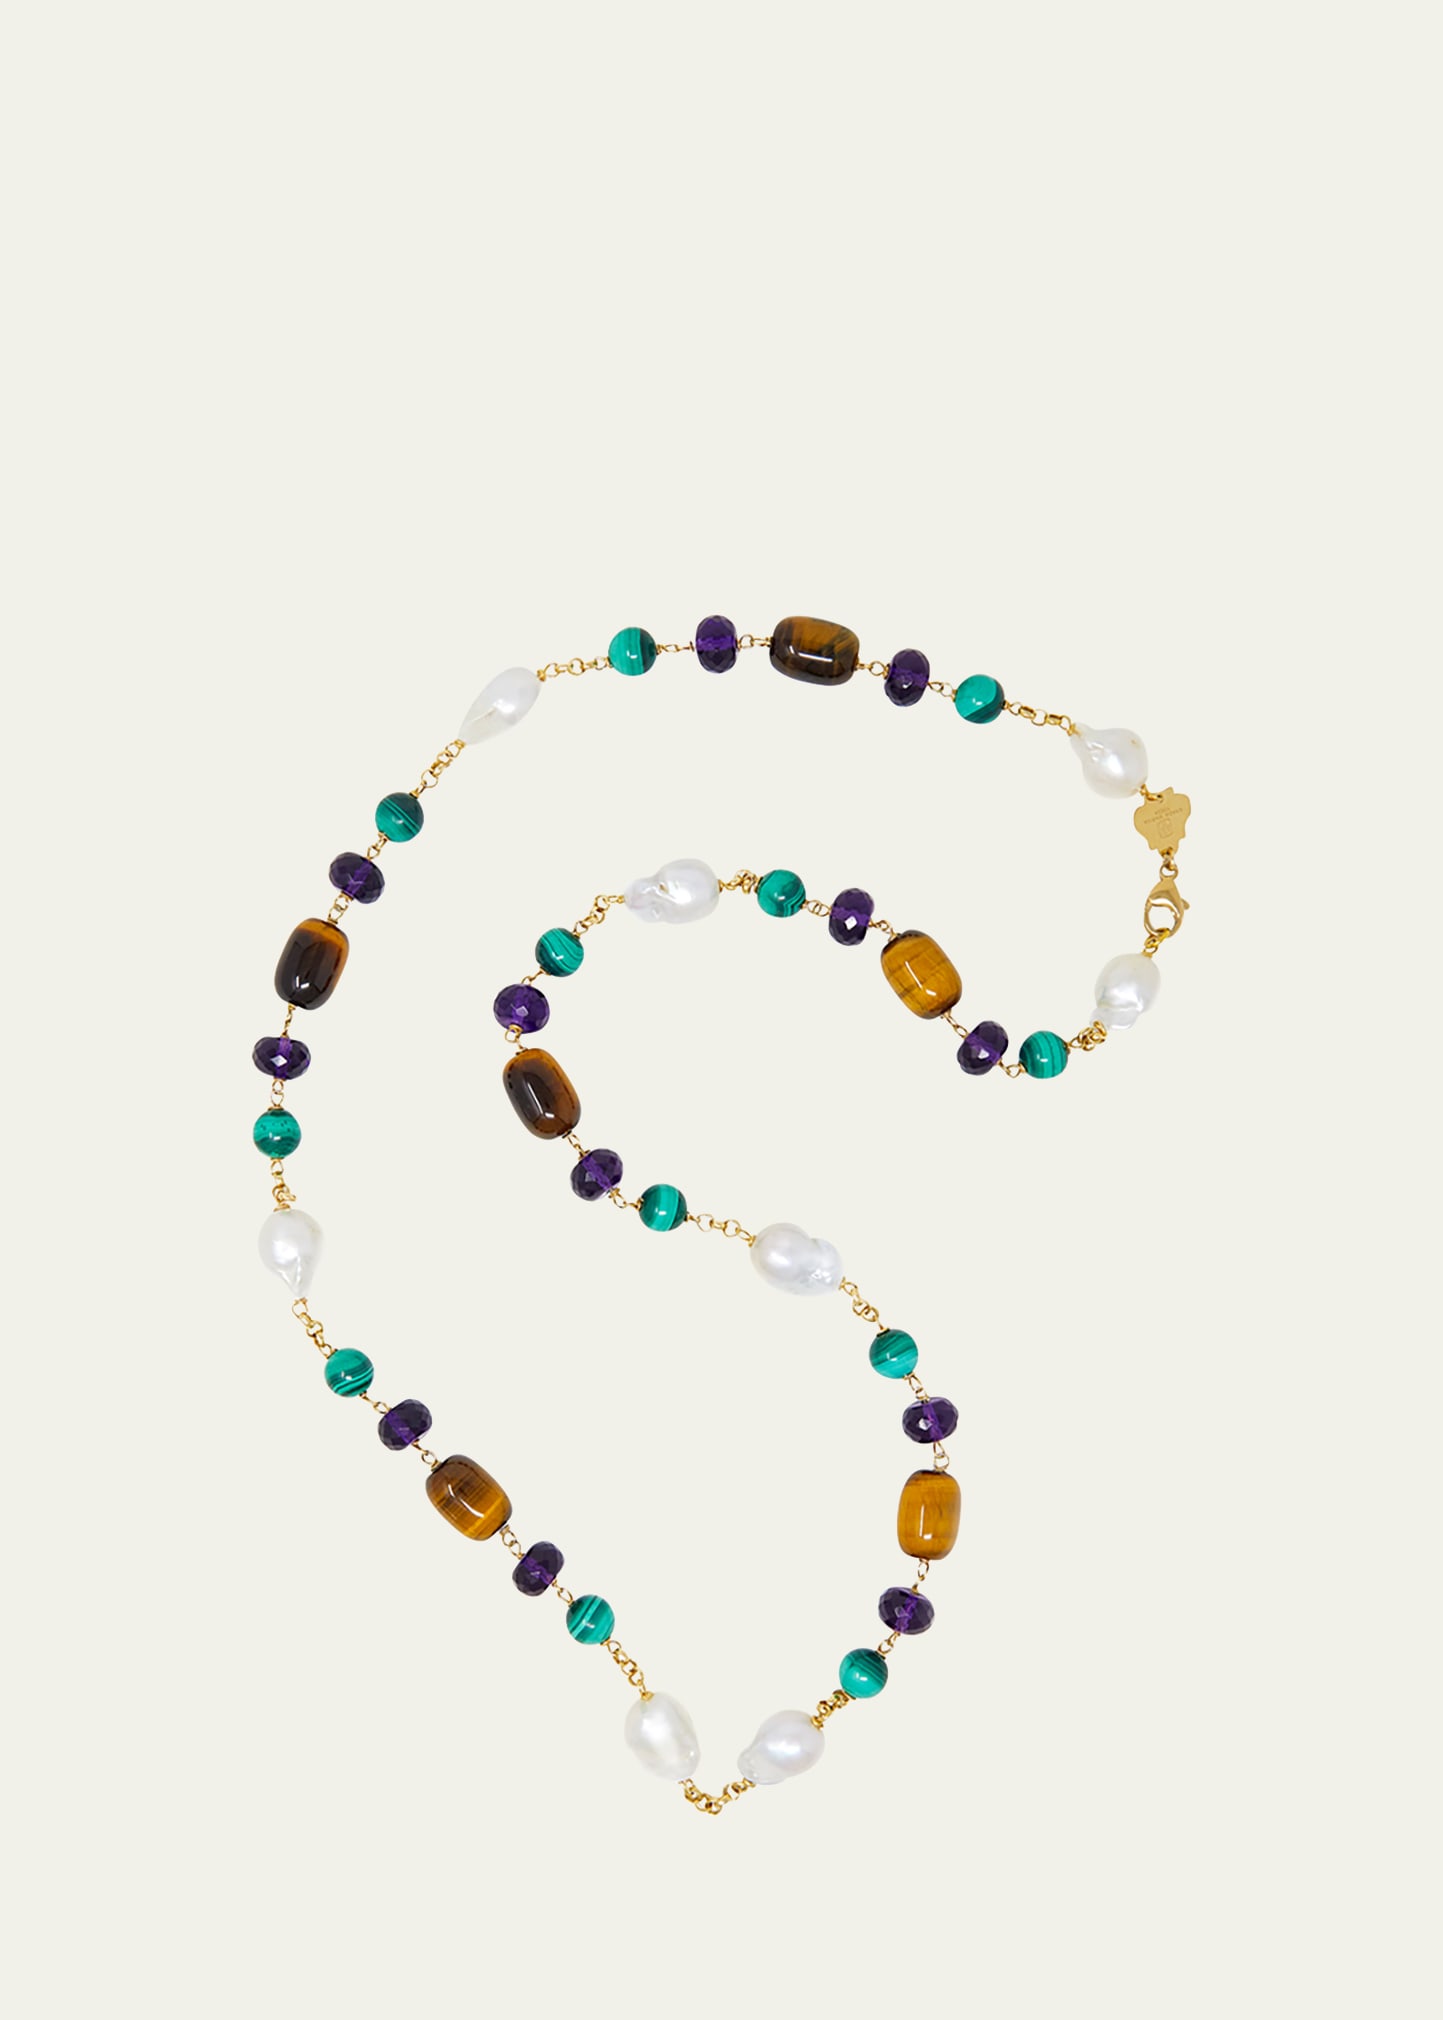 Grazia And Marica Vozza 18K Yellow Gold Freshwater Baroque Pearl Necklace with Malachite, Amethyst and Tigers Eye